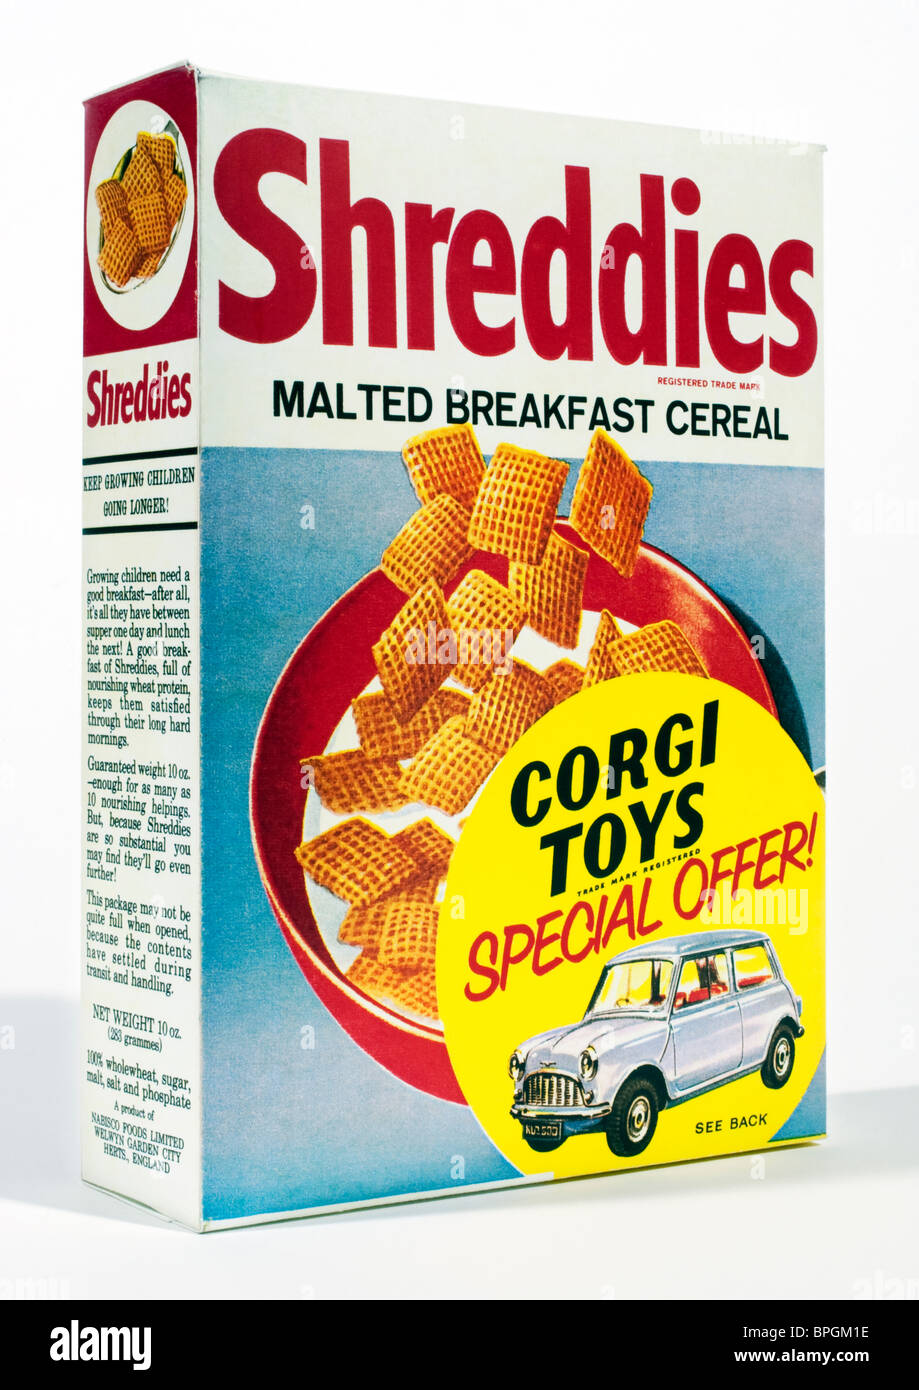 Nineteen sixties box of Shreddies Malted Breakfast Cereal with Corgi Model Car Special Offer Stock Photo